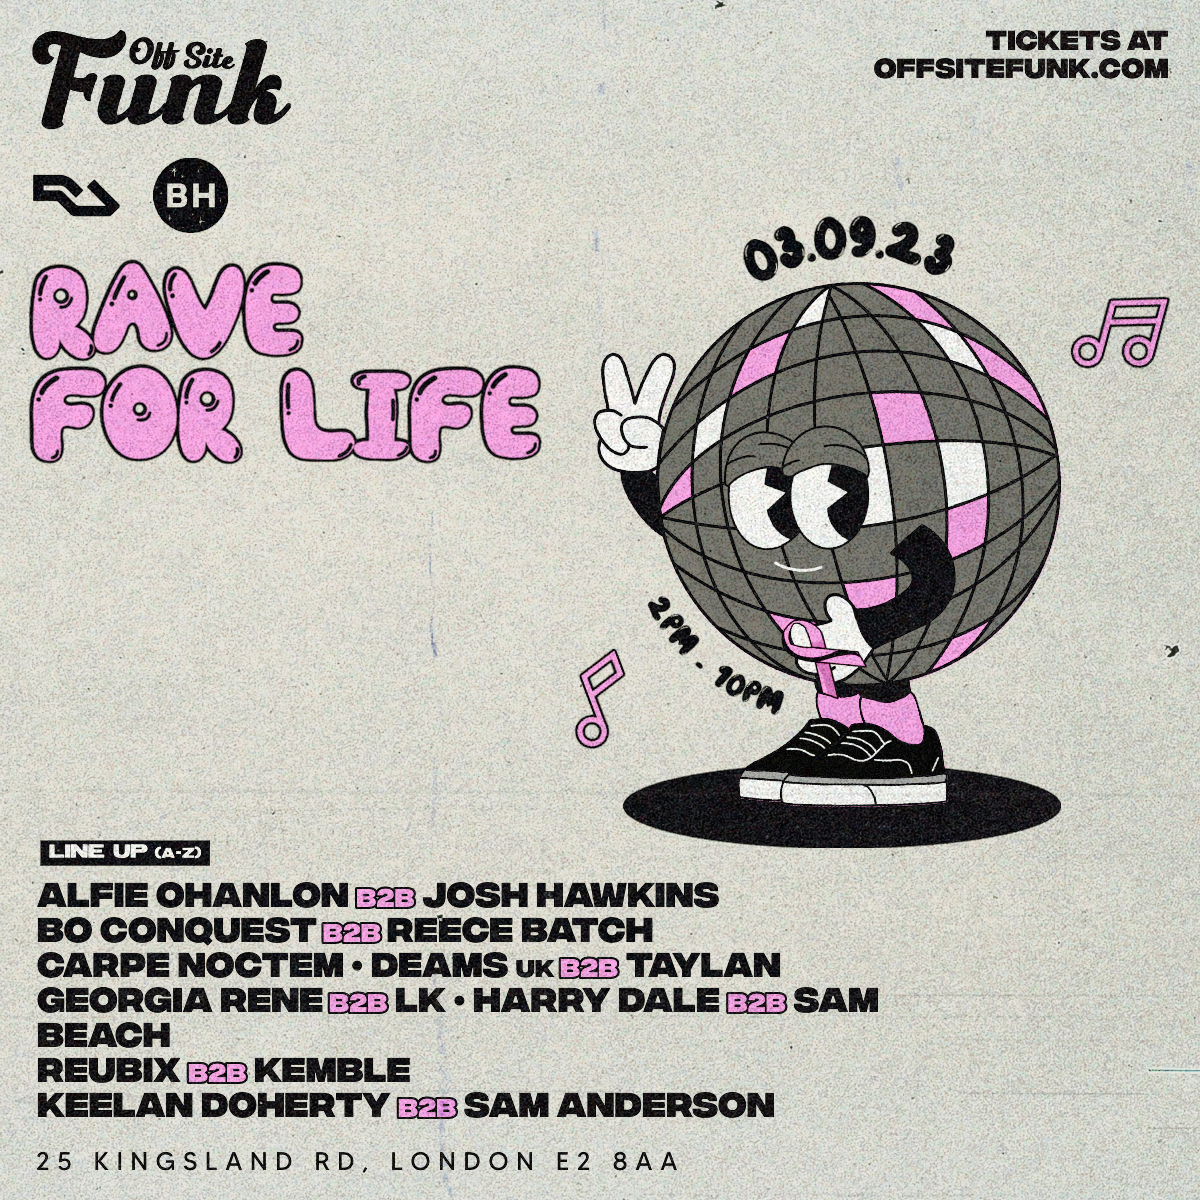 Off Site Funk - Rave For Life (Charity Event) - フライヤー表